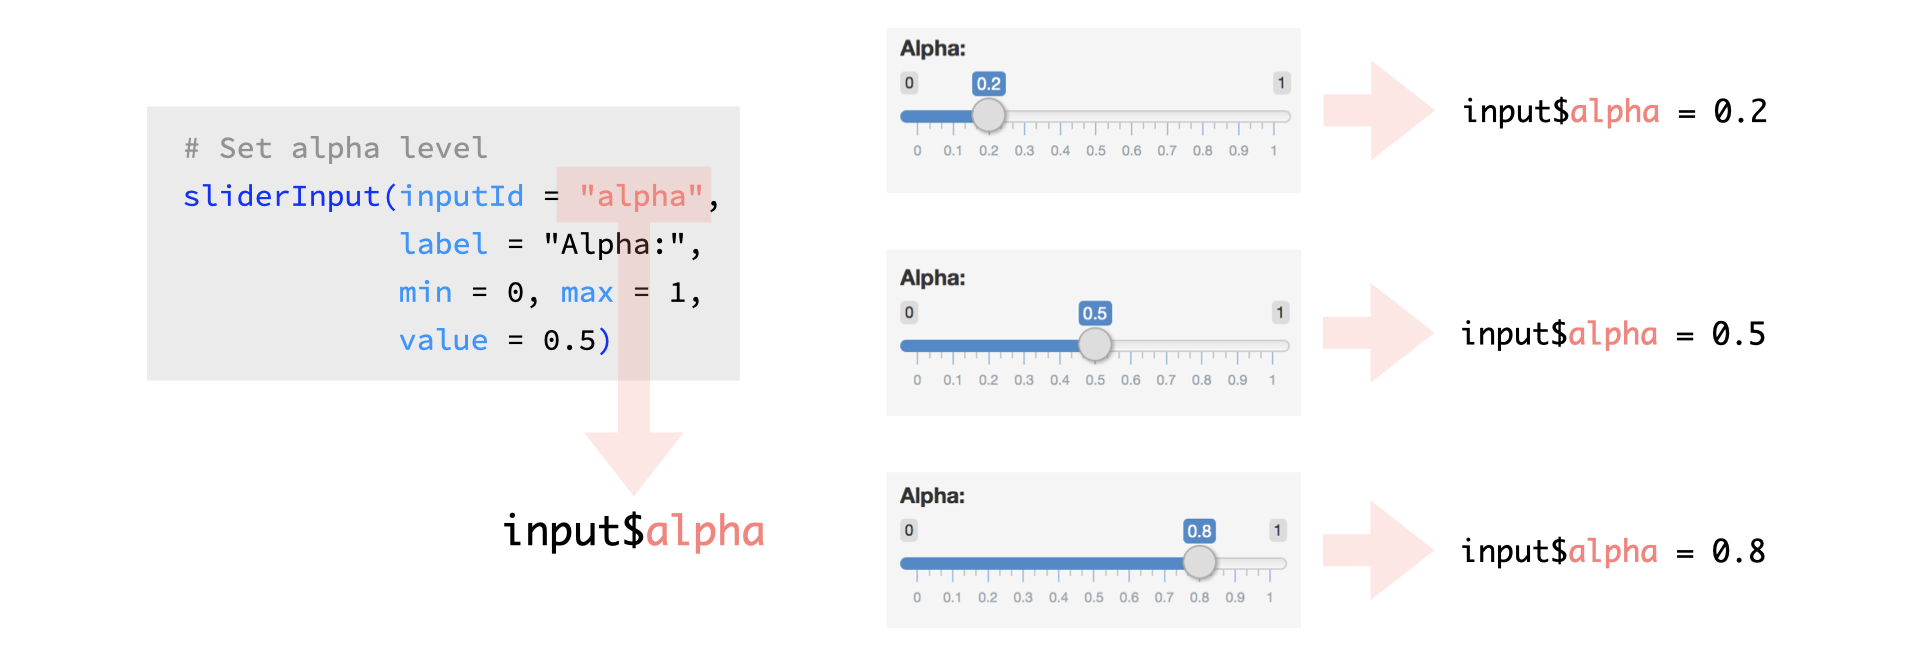 Image highlighting 'inputId = alpha' in the code and the variables 'input$alpha' changing numbers and the corresponding slider bar changing numbers.